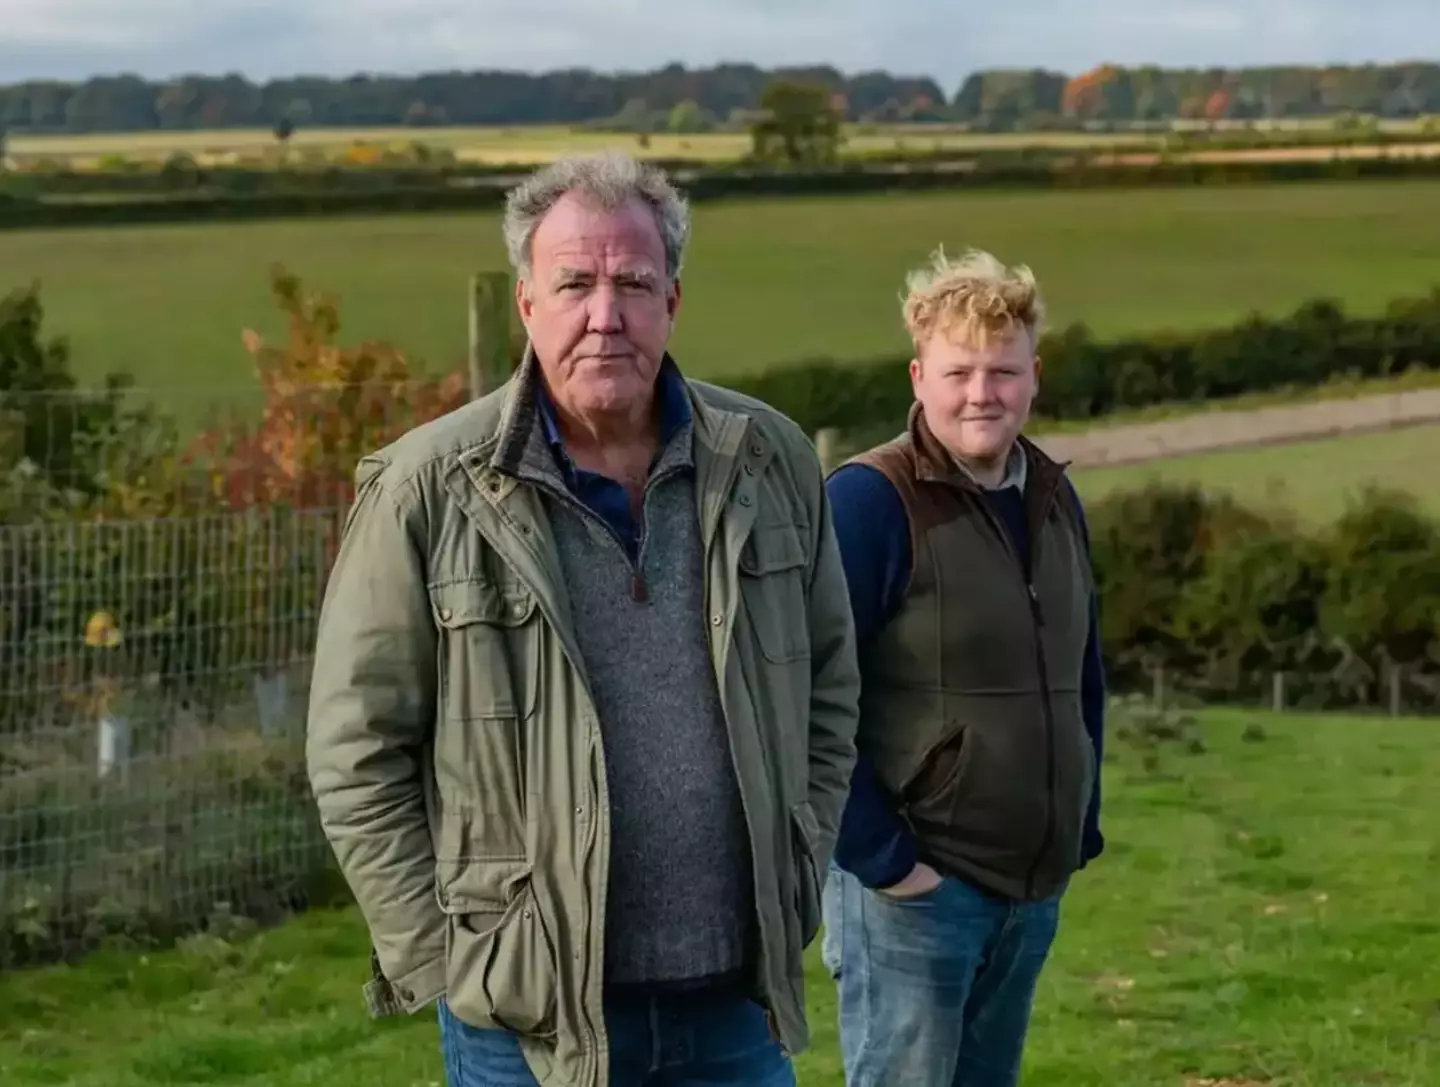 Jeremy and Kaleb during the filming of Clarkson's Farm.